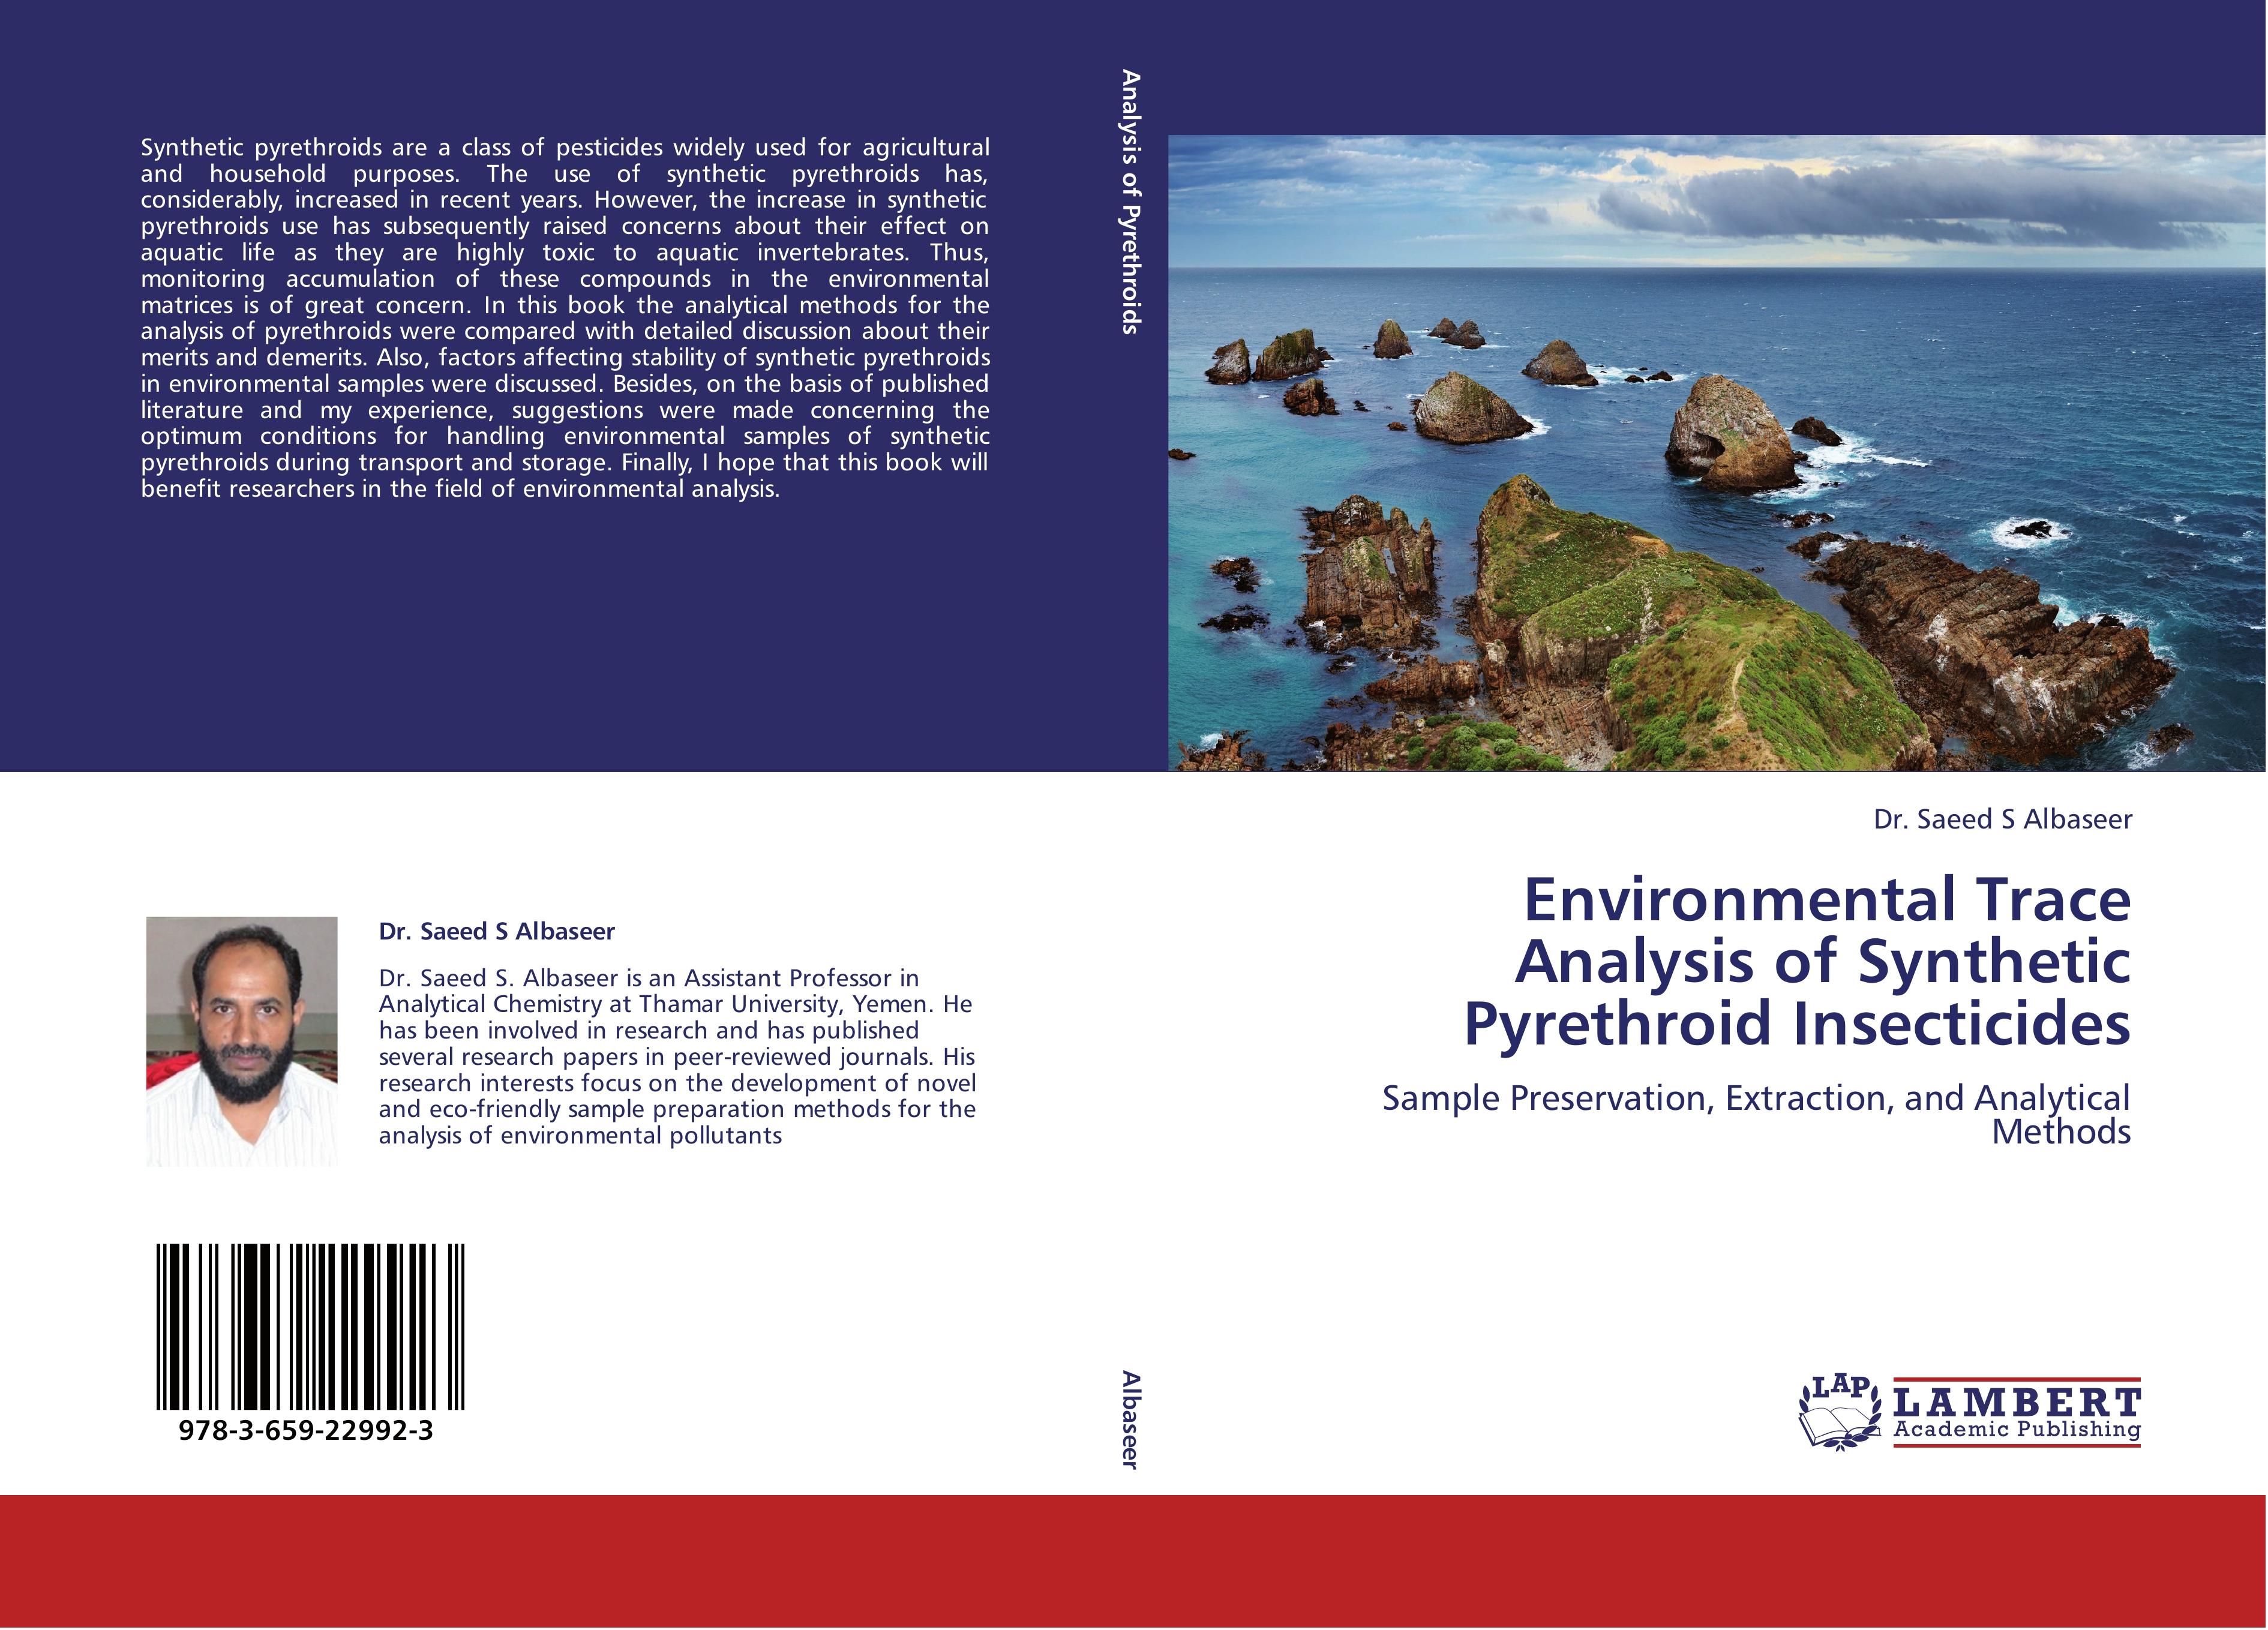 Environmental Trace Analysis of Synthetic Pyrethroid Insecticides - Dr. Saeed S Albaseer